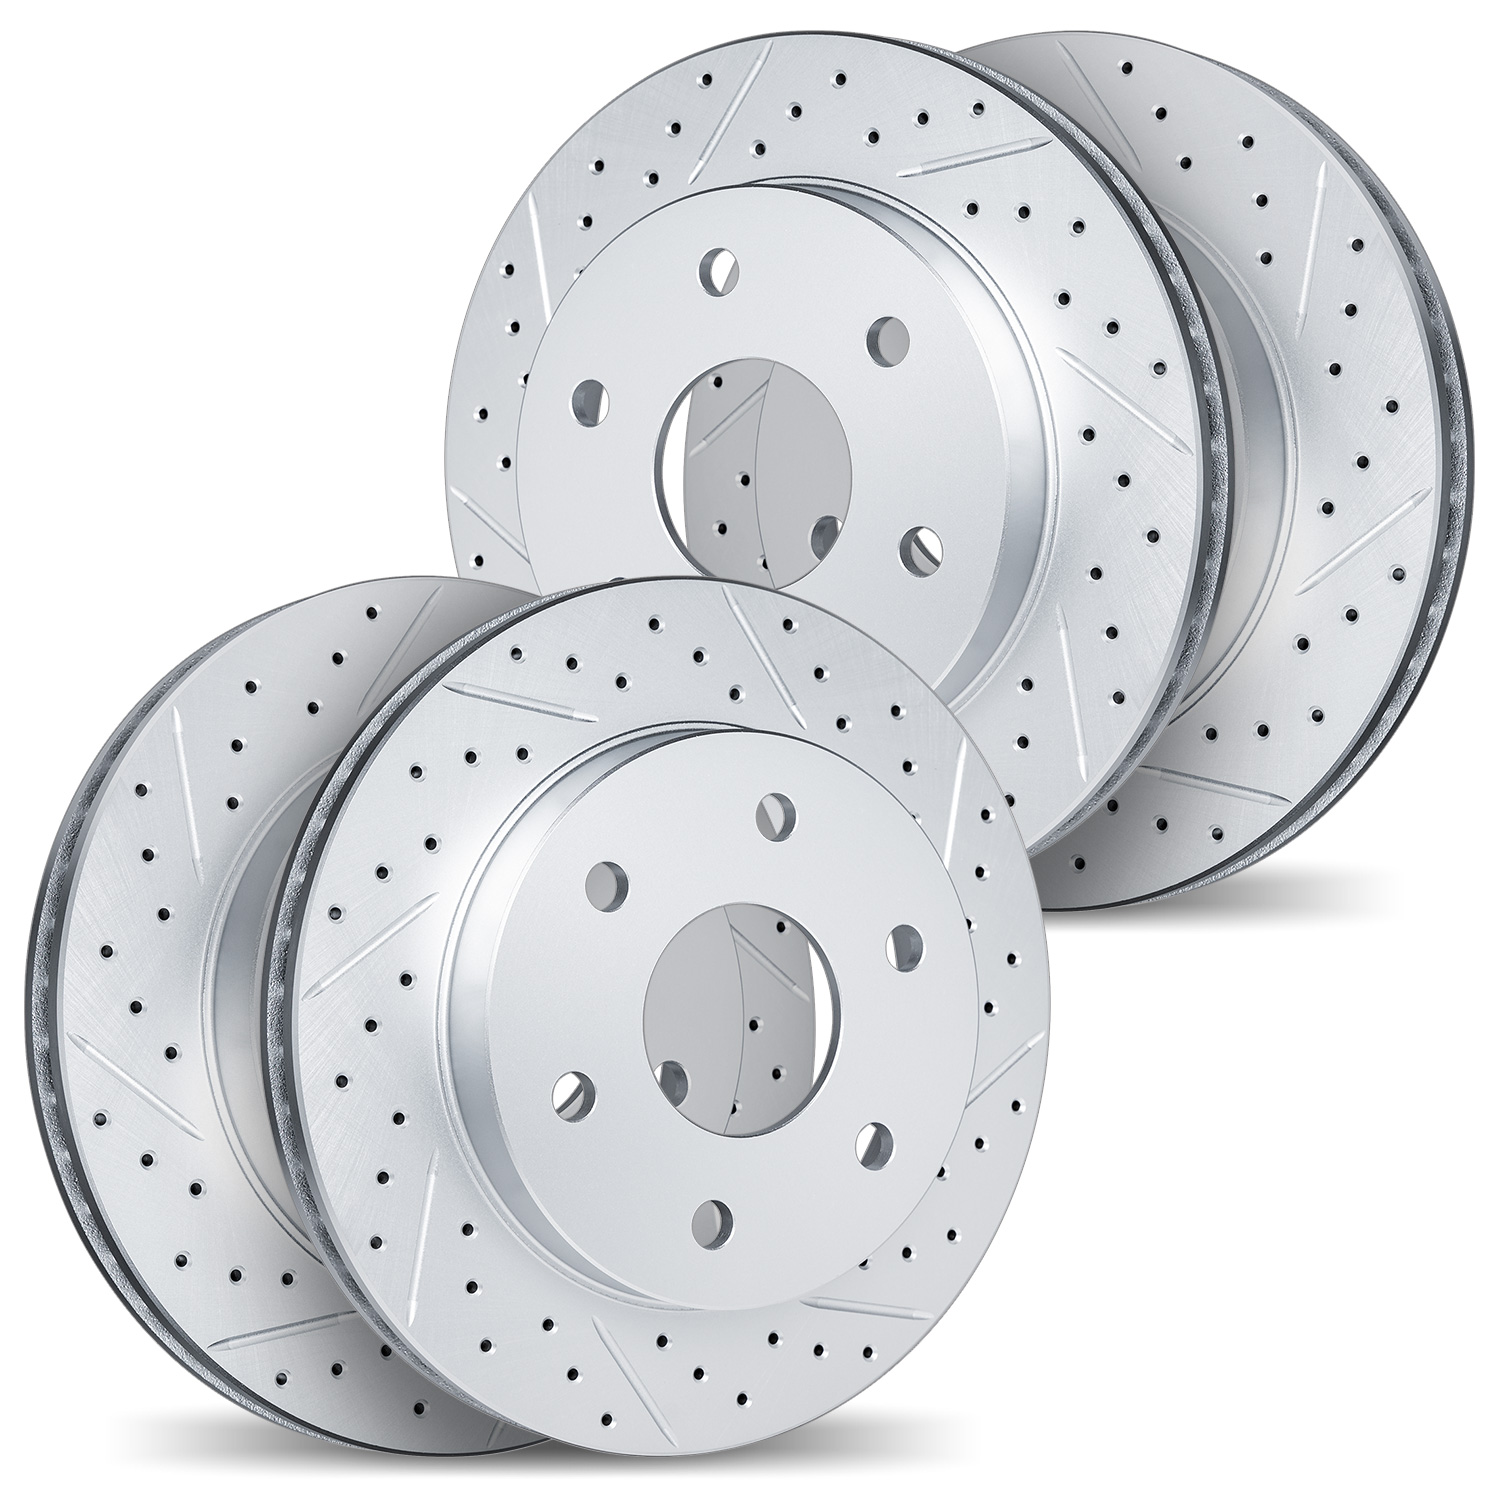 2004-47016 Geoperformance Drilled/Slotted Brake Rotors, 2015-2020 GM, Position: Front and Rear